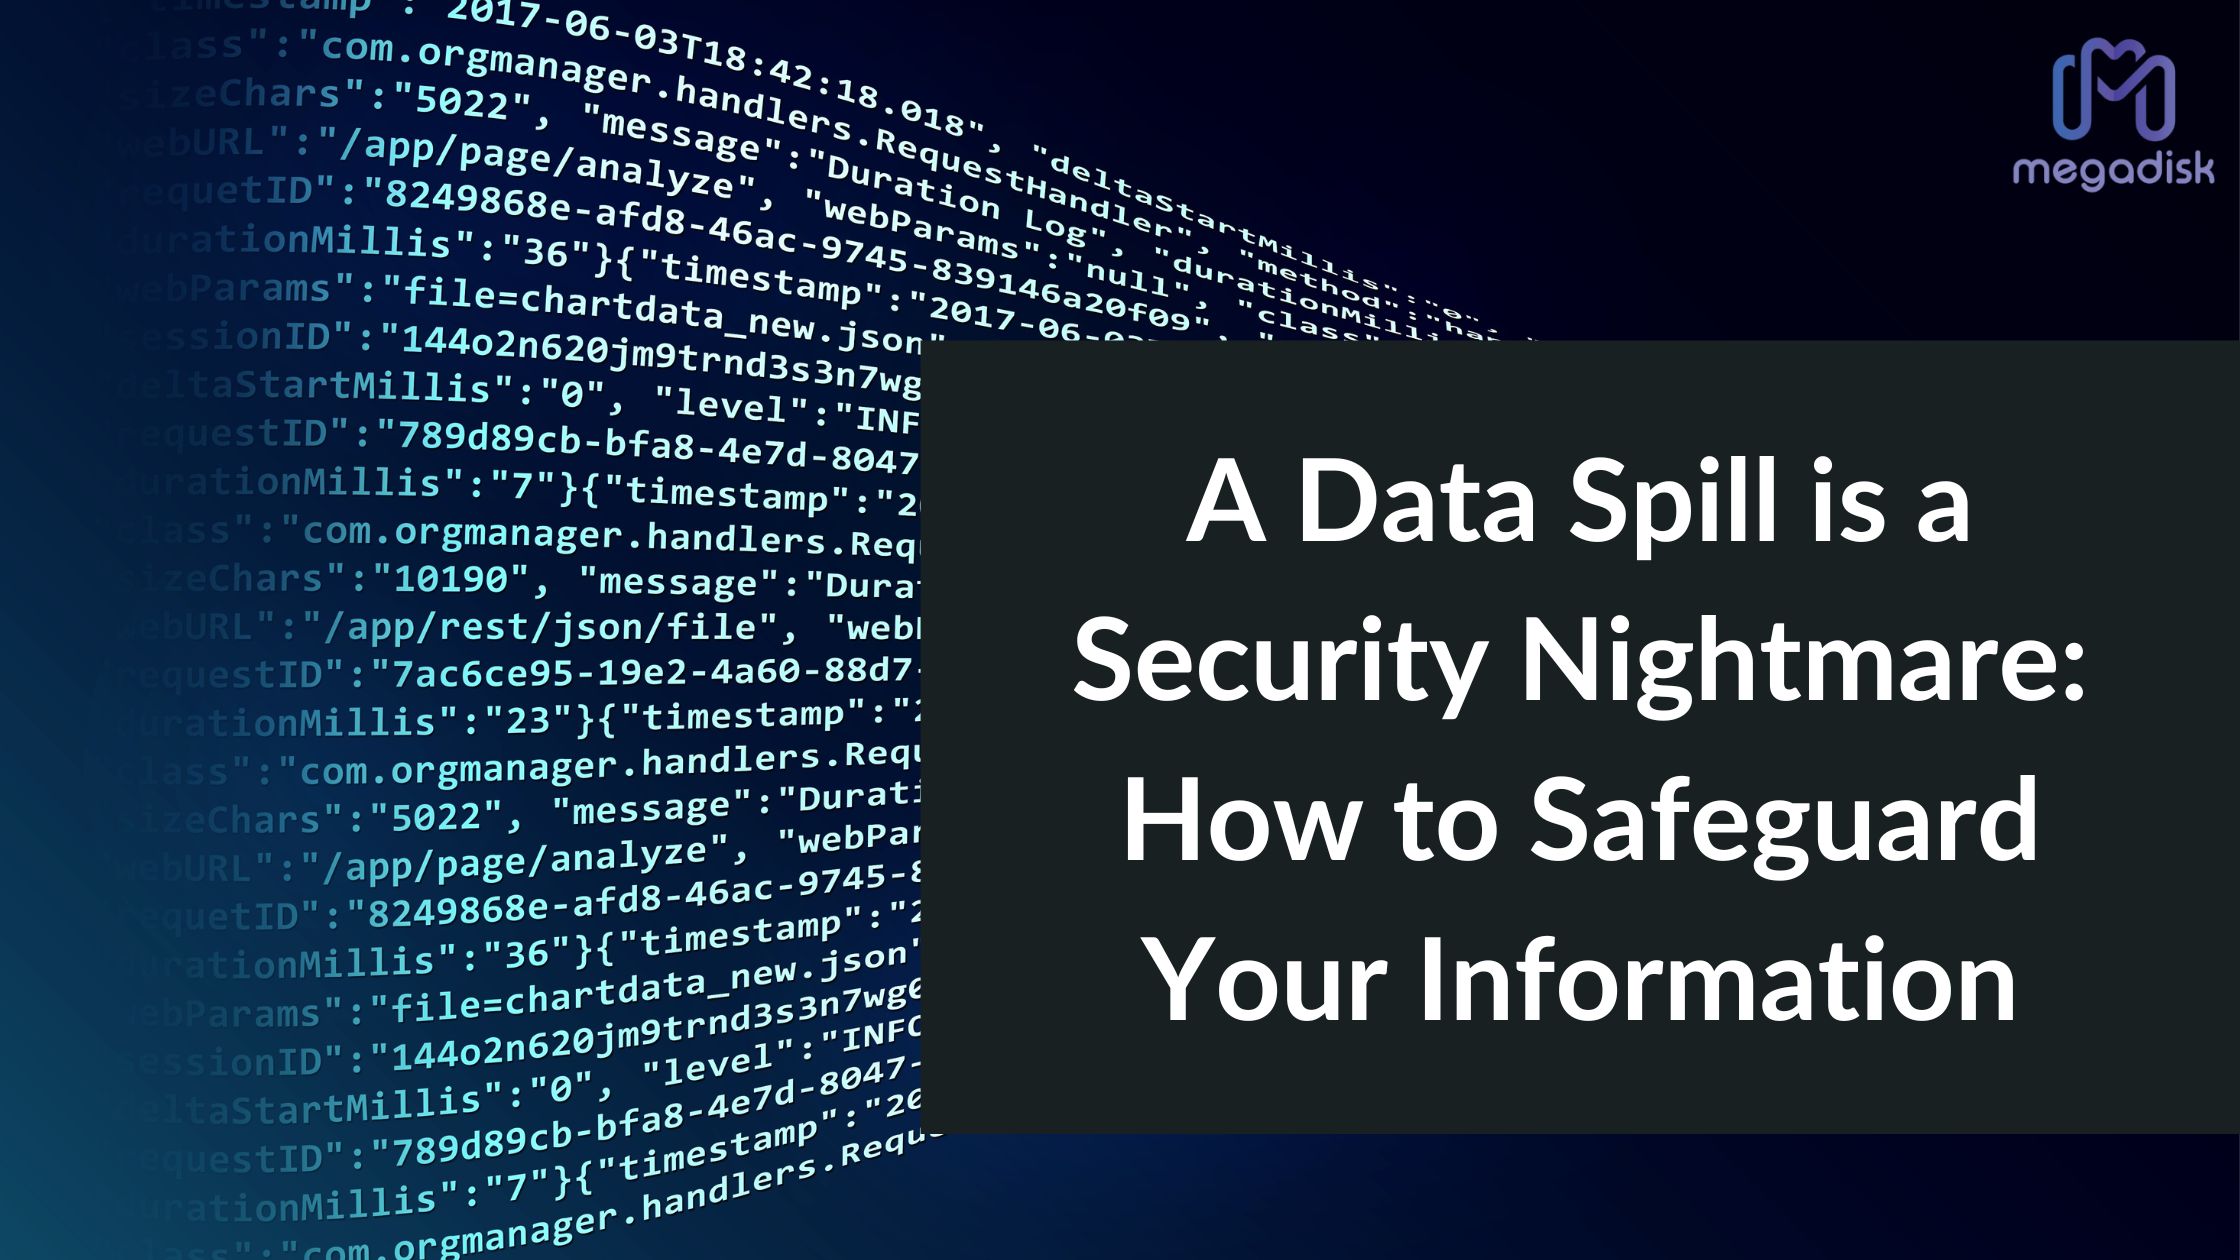 A Data Spill is a Security Nightmare: How to Safeguard Your Information